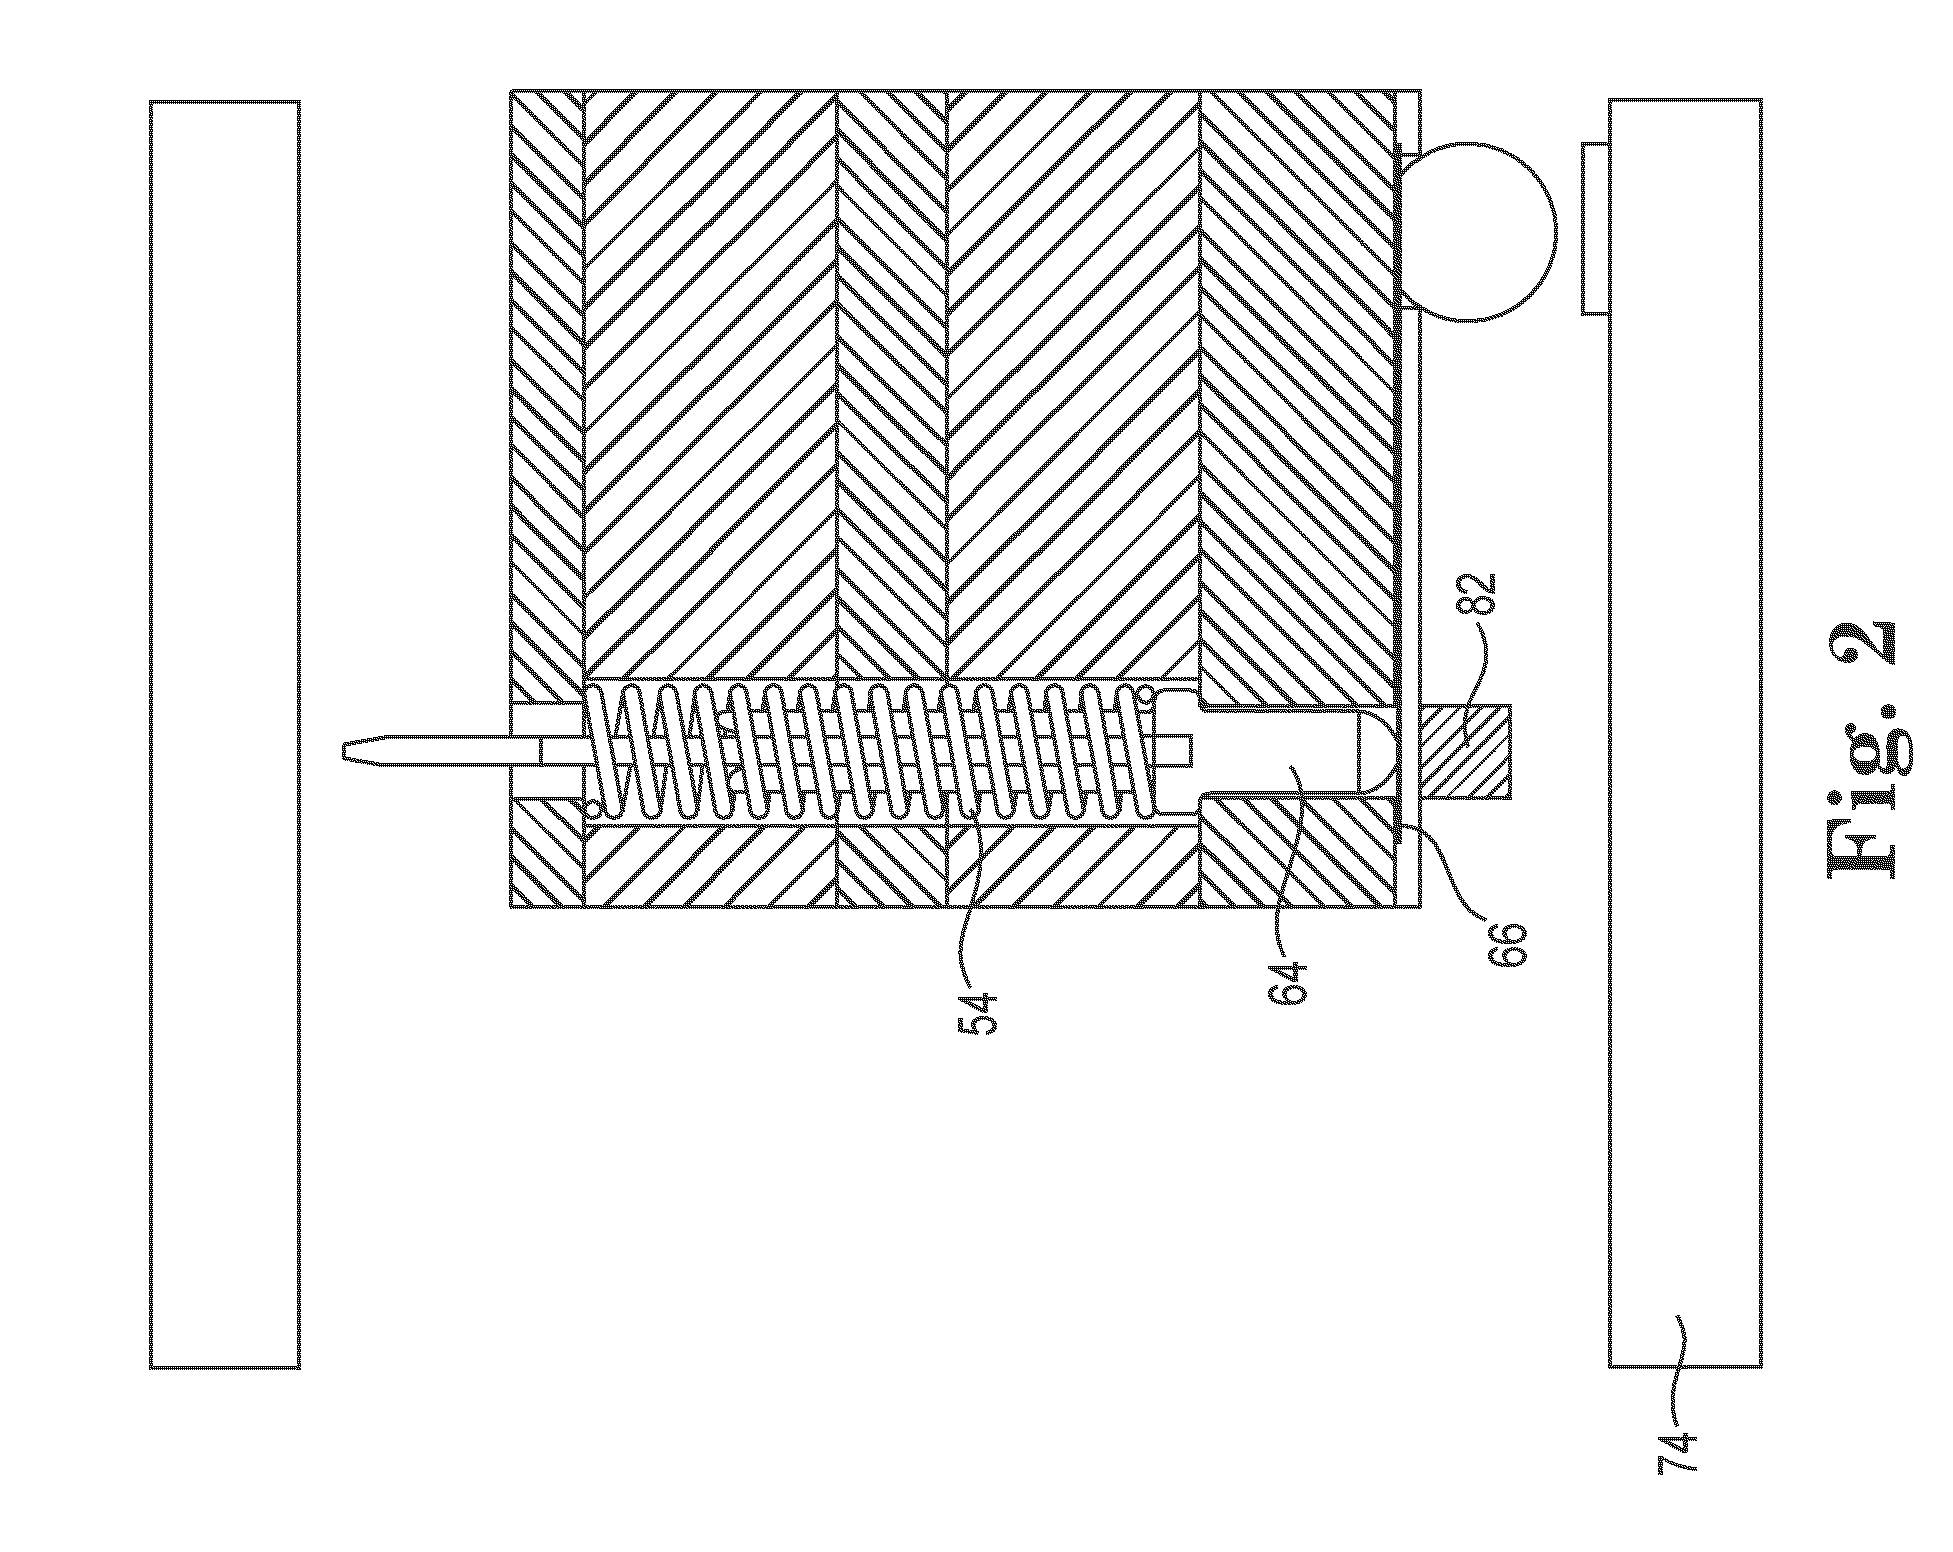 Metalized pad to electrical contact interface